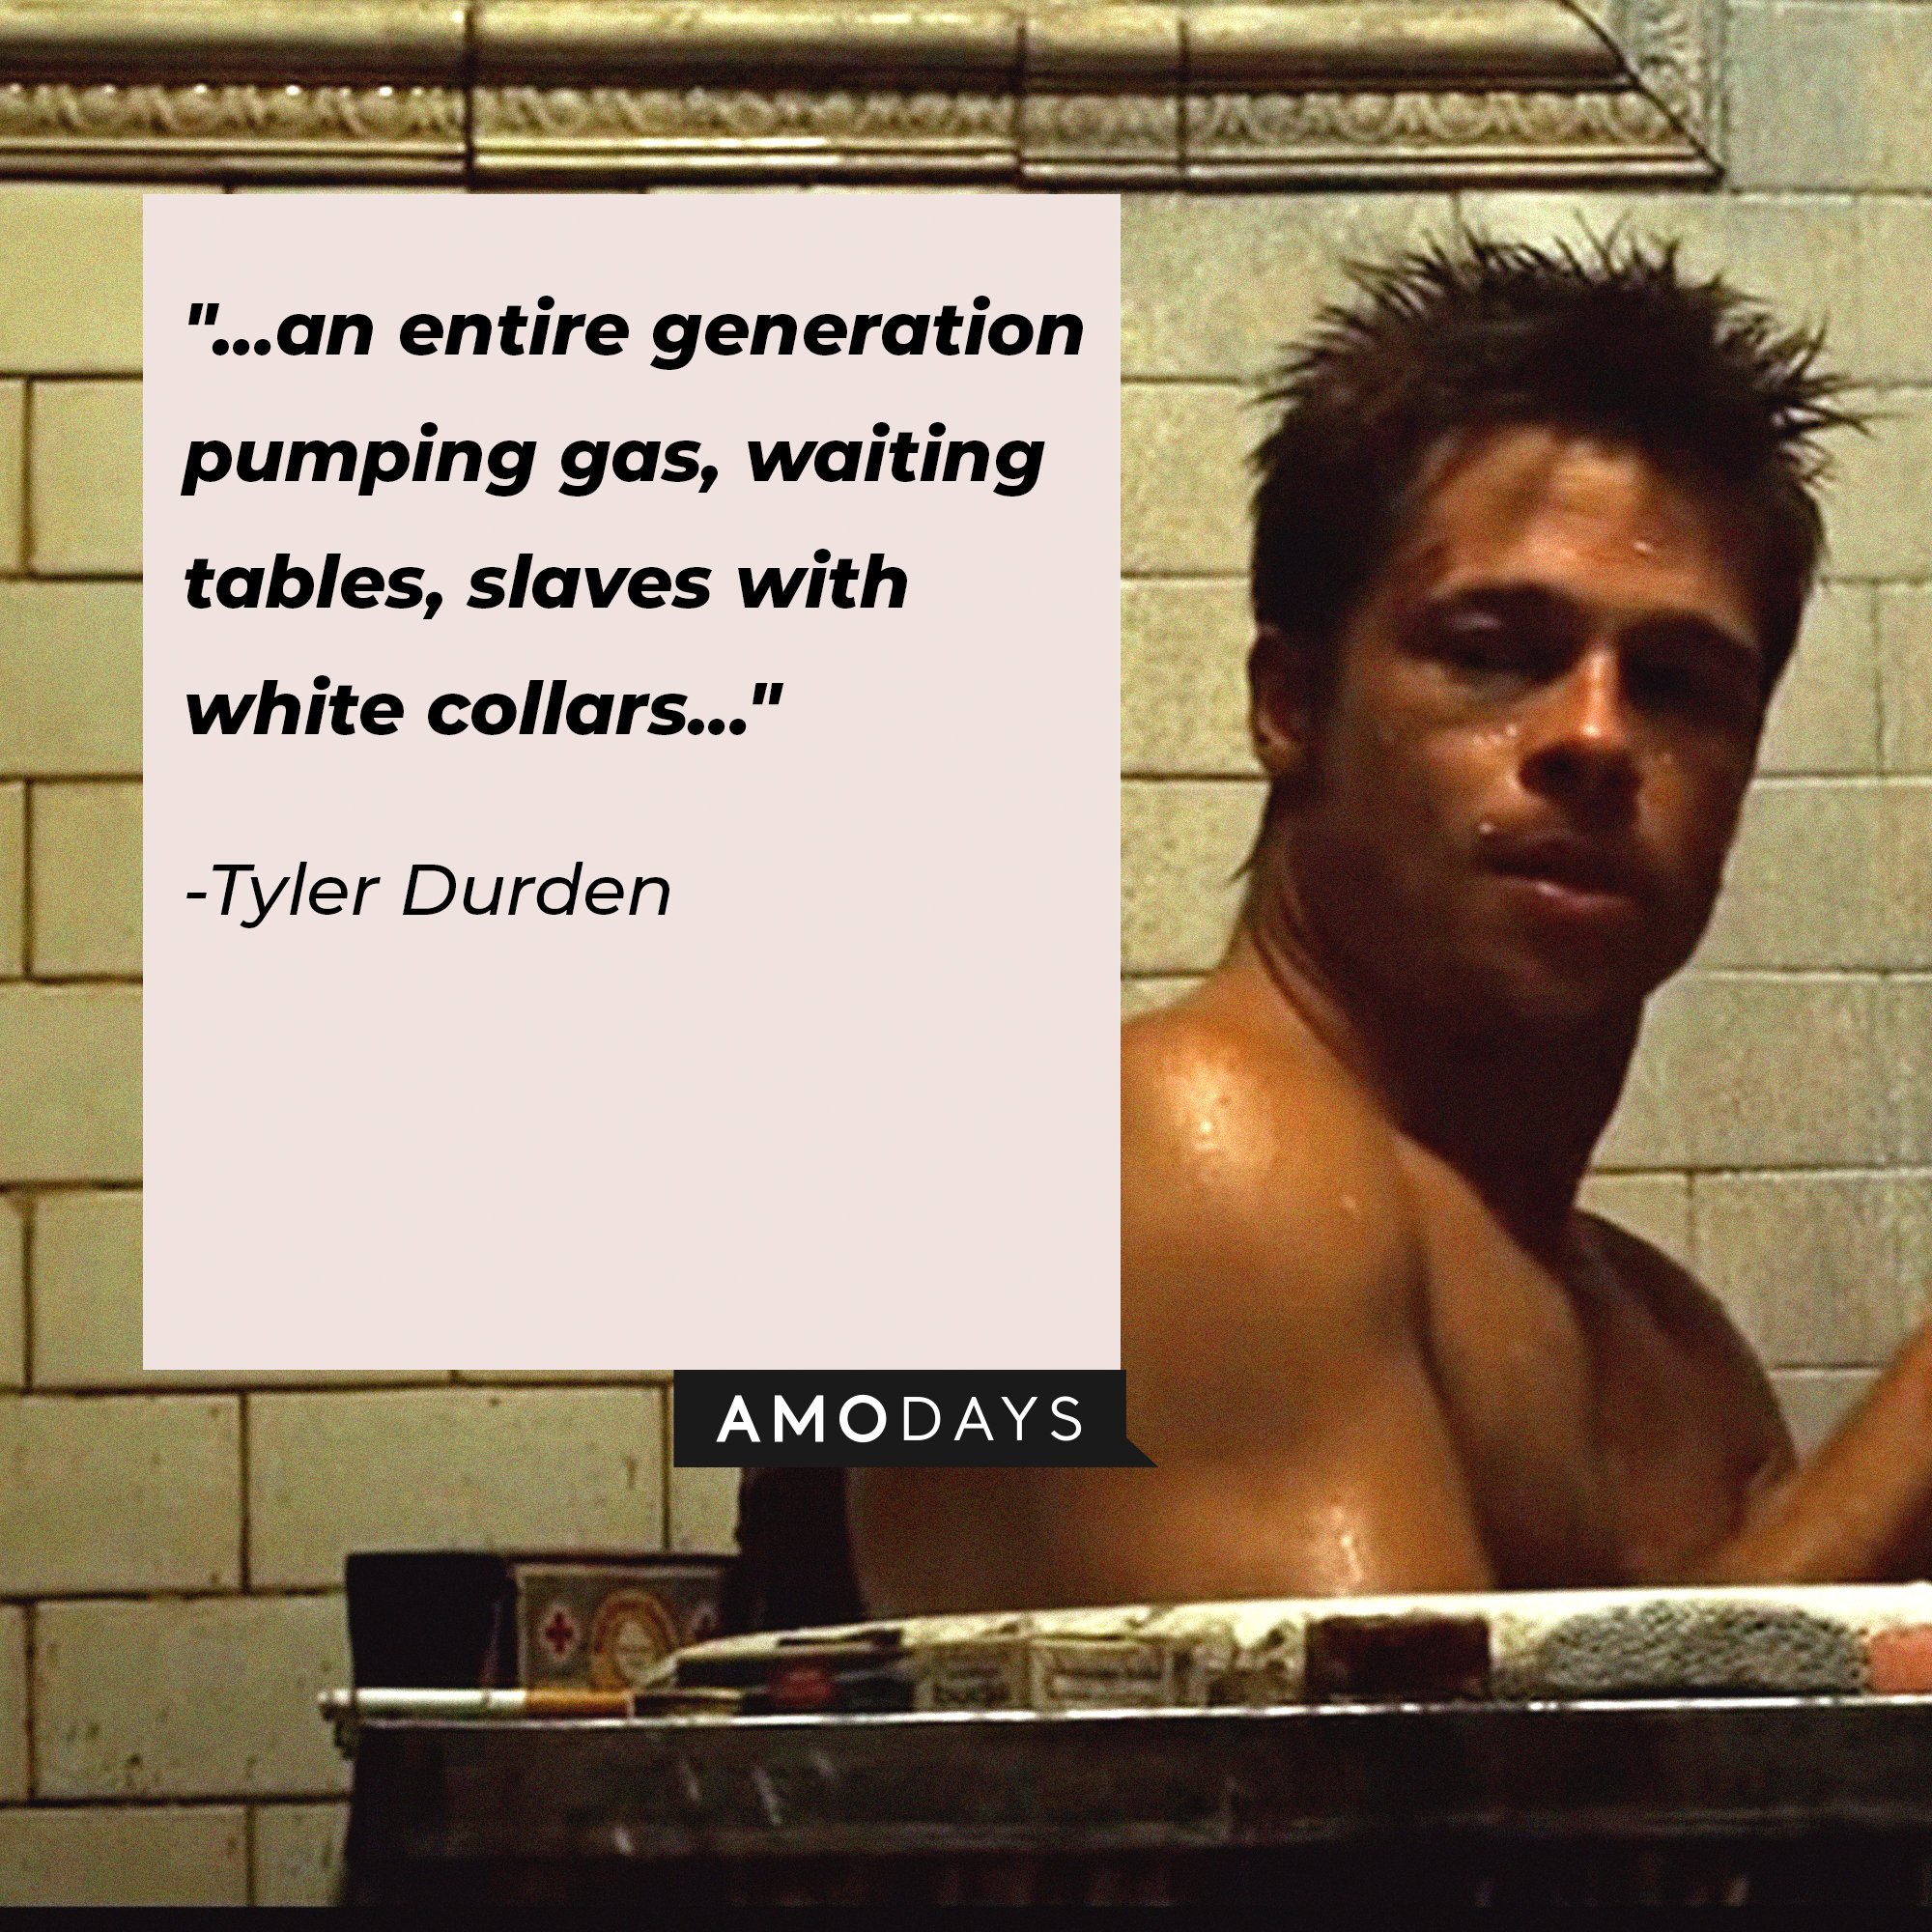 Tyler Durden’s quote: "…an entire generation pumping gas, waiting tables, slaves with white collars…" | Image: AmoDays